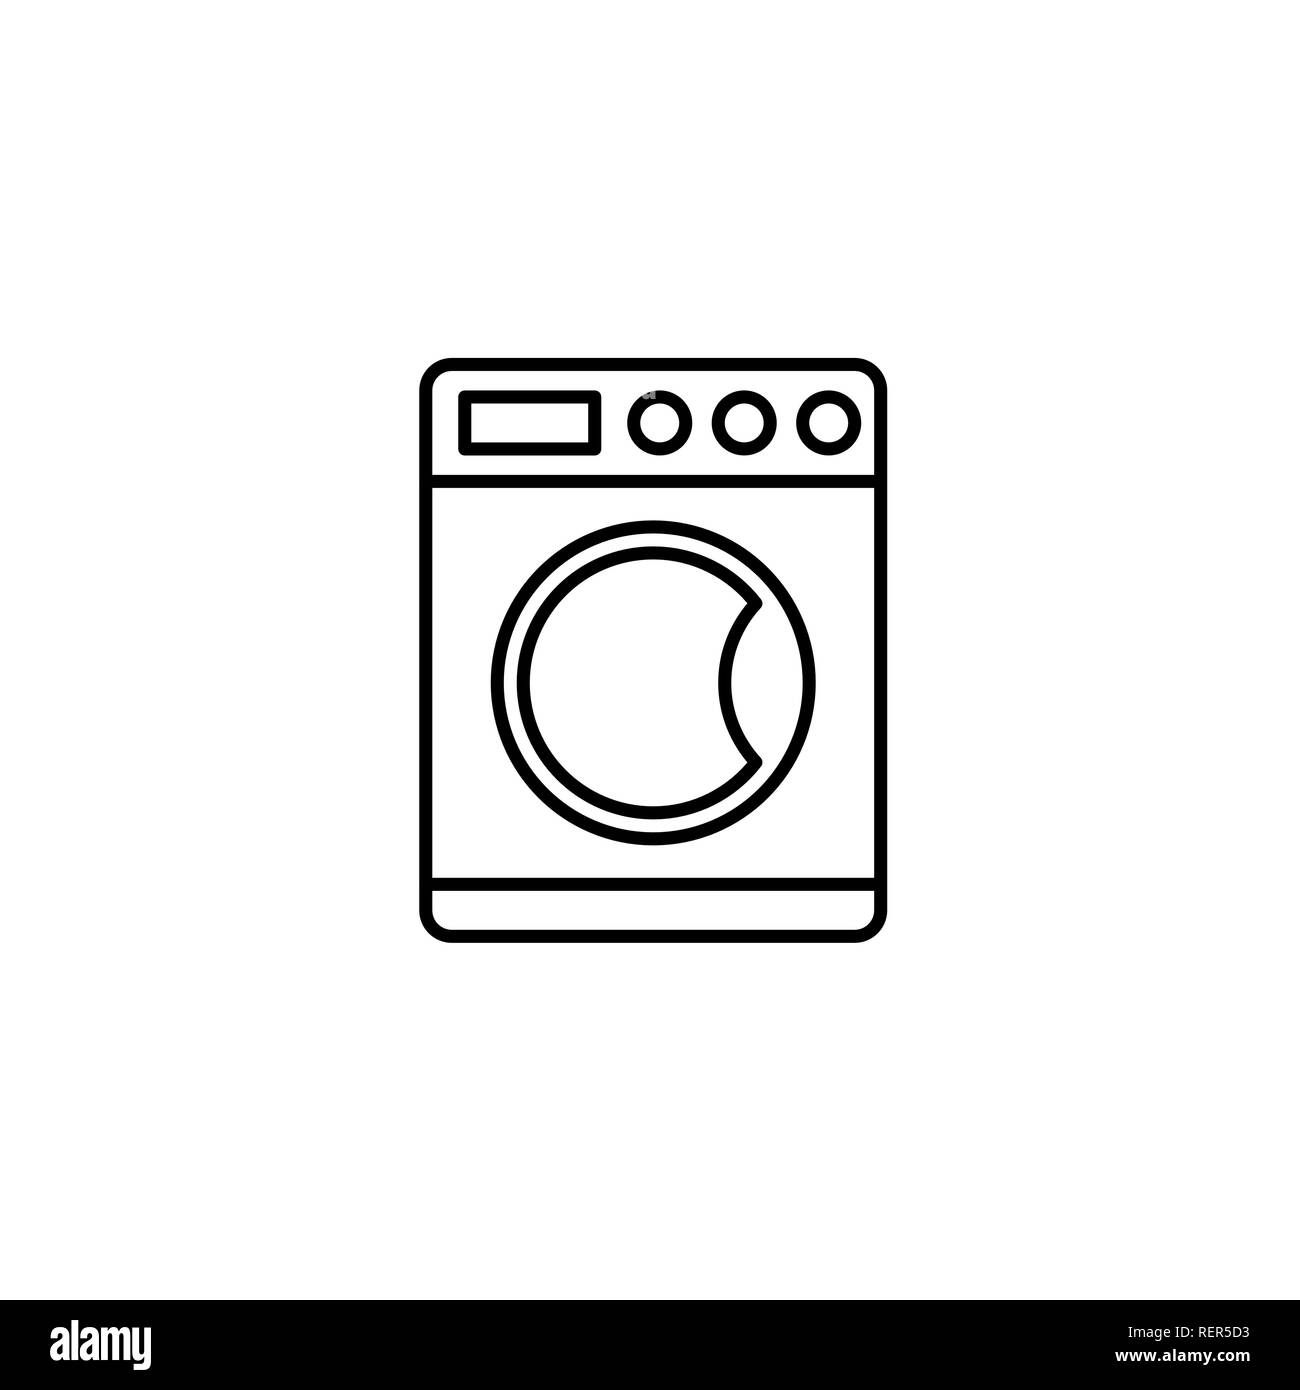 Washing Machine Related Vector Line Icon. Stock Vector